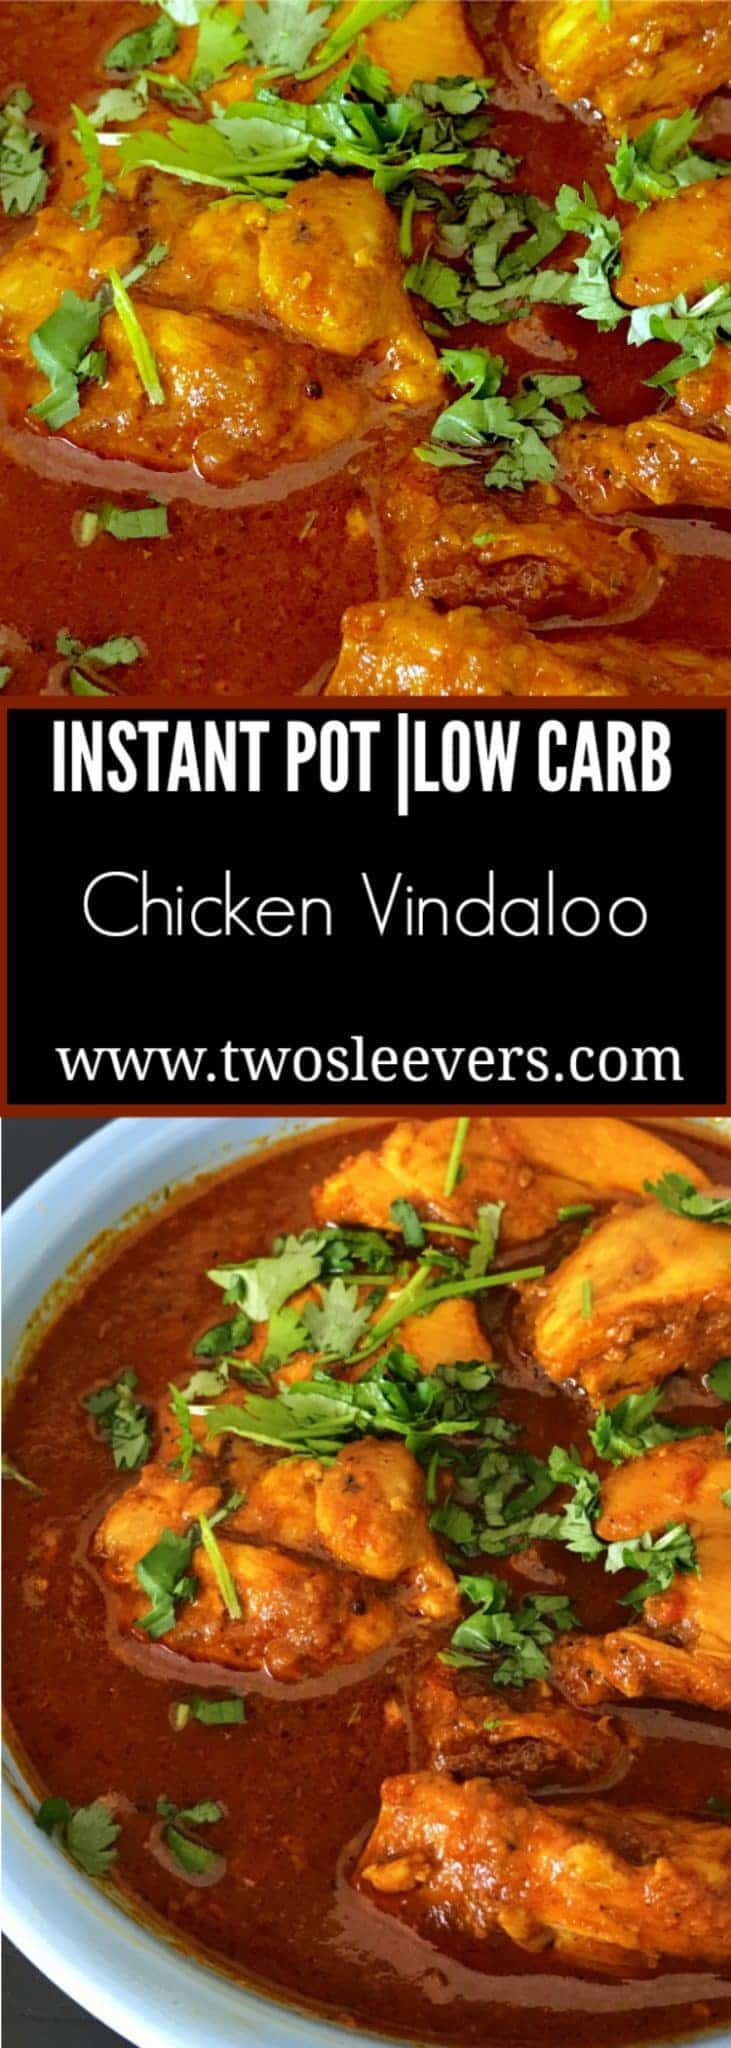 Instant Pot Low Fat Recipes
 Instant Pot Low Carb Chicken Vindaloo – Two Sleevers